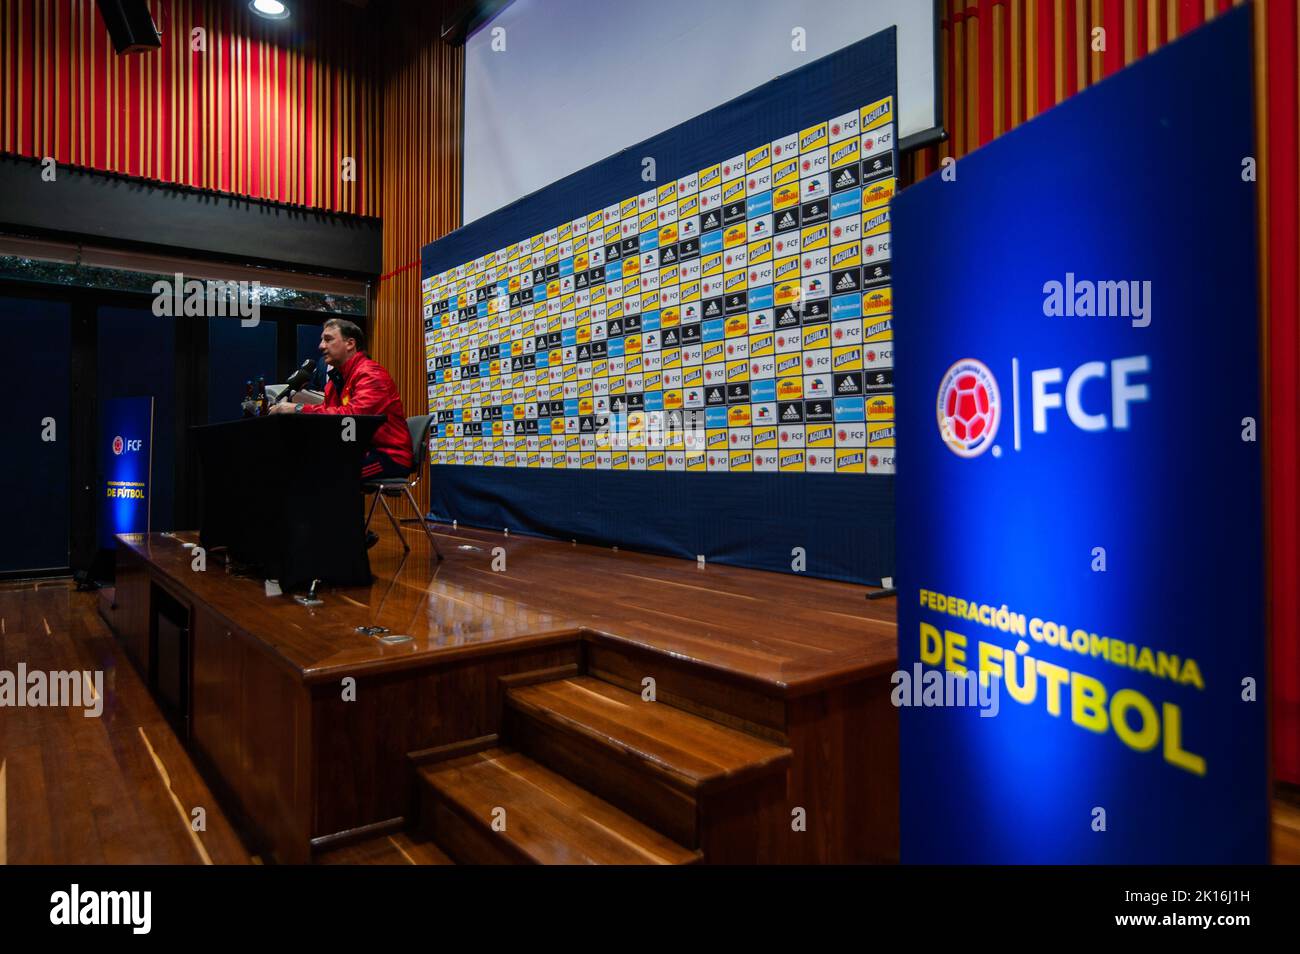 Bogota, Colombia. 15th Sep, 2022. Colombia's football team coah Nestor Lorenzo speaks during a press conference after the decision on calling team veterans: Radamel Falcao, James Rodriguez and Luis Diaz, in Bogota, Colombia, September 15, 2022, for the friendly matches tour in the United States for the Septemeber FIFA Matches against Guatemala on september 24 in New York and against Mexico on september 27. Credit: Long Visual Press/Alamy Live News Stock Photo